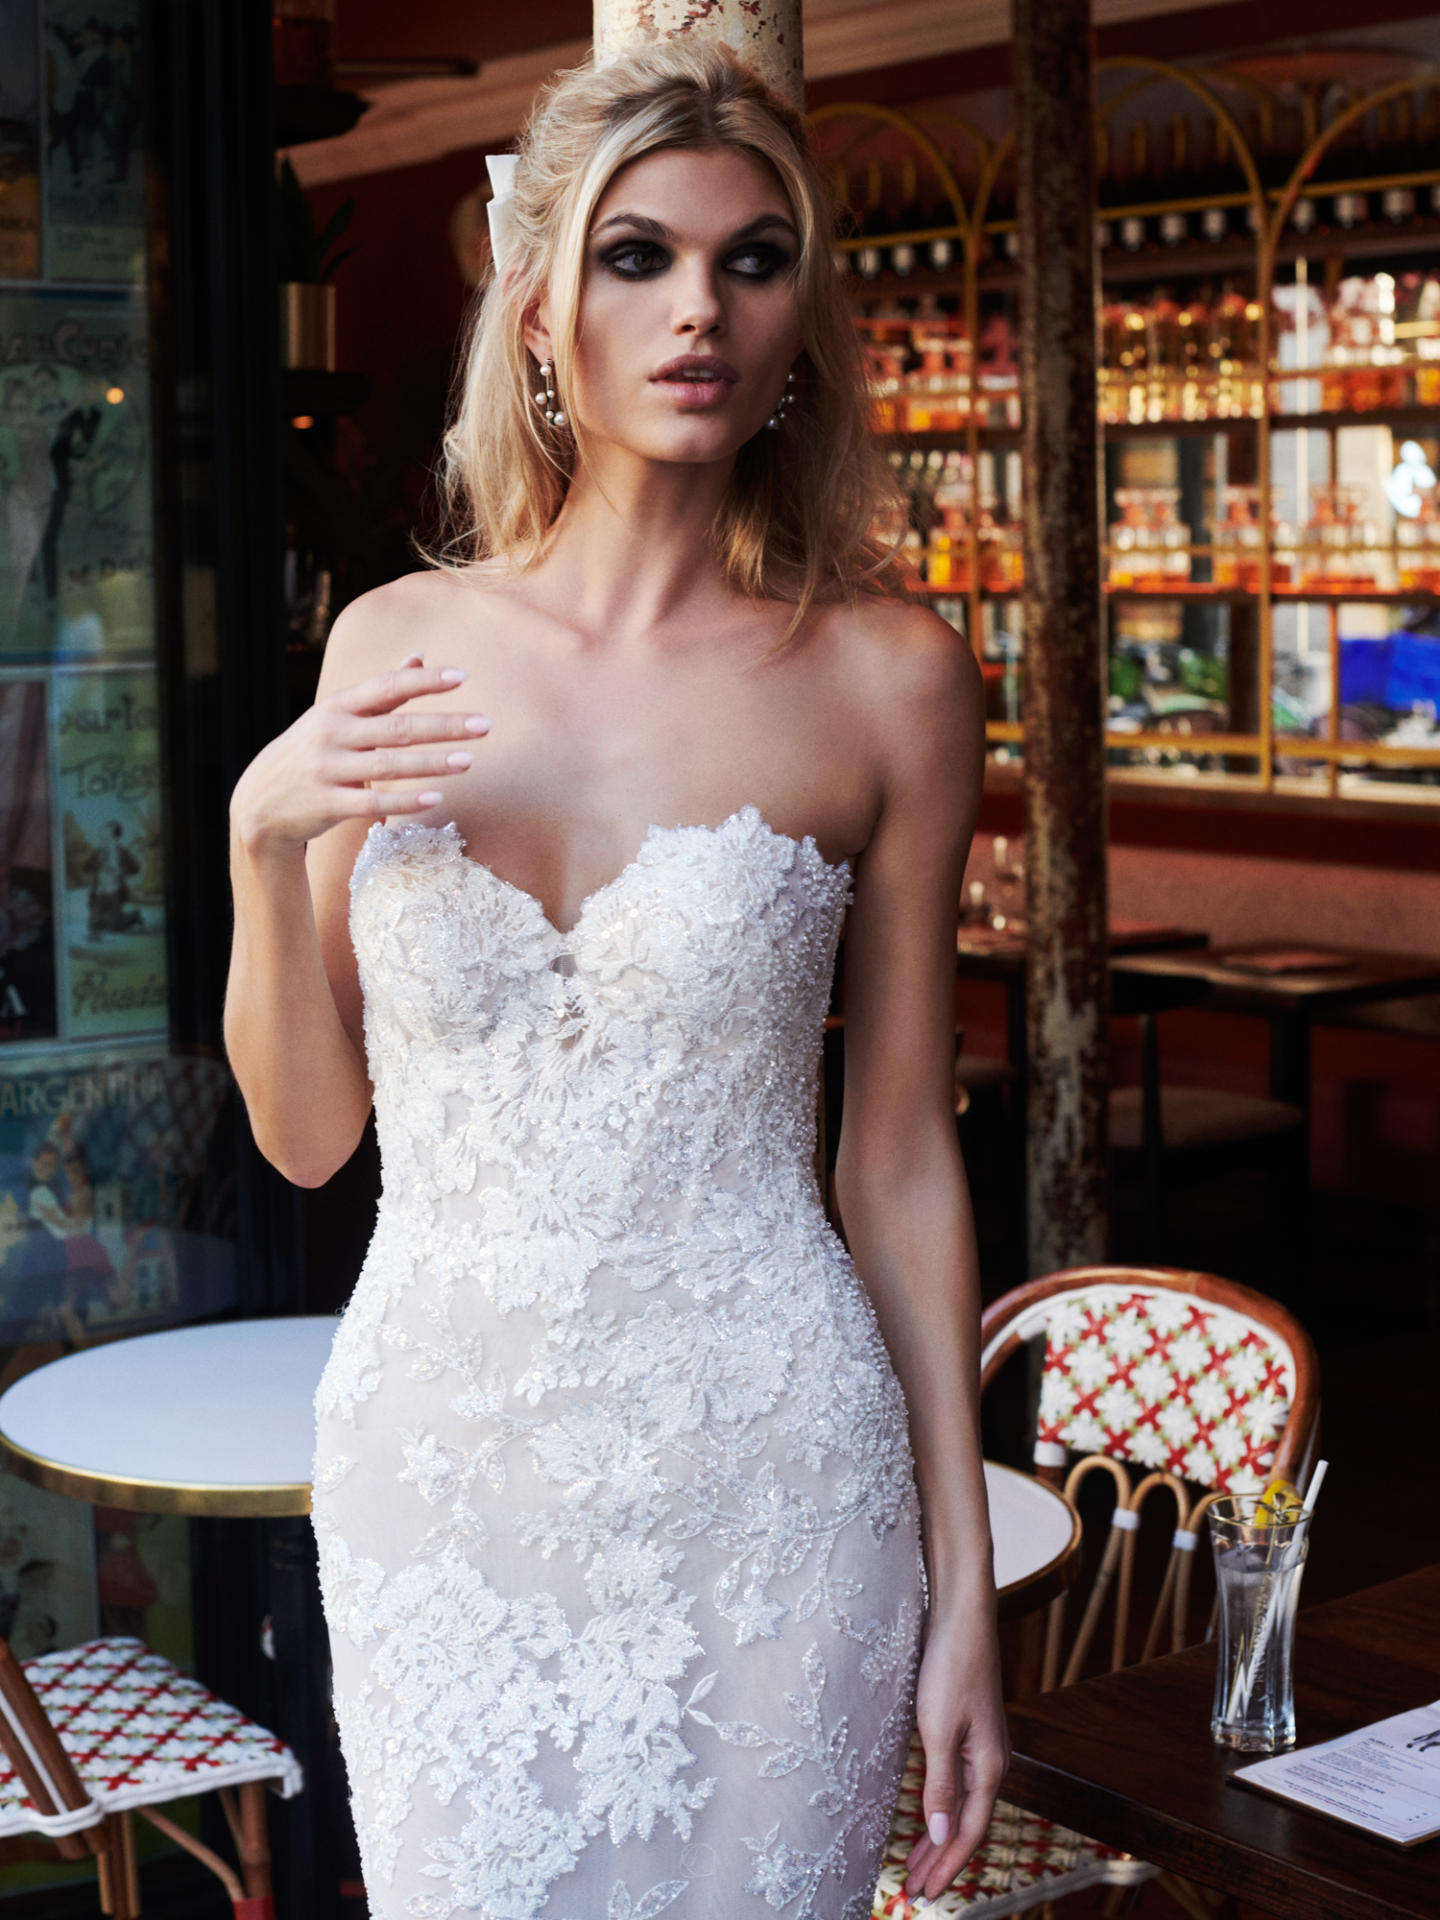 Would it be tacky to wear a lacy white bra with this? : r/weddingdress